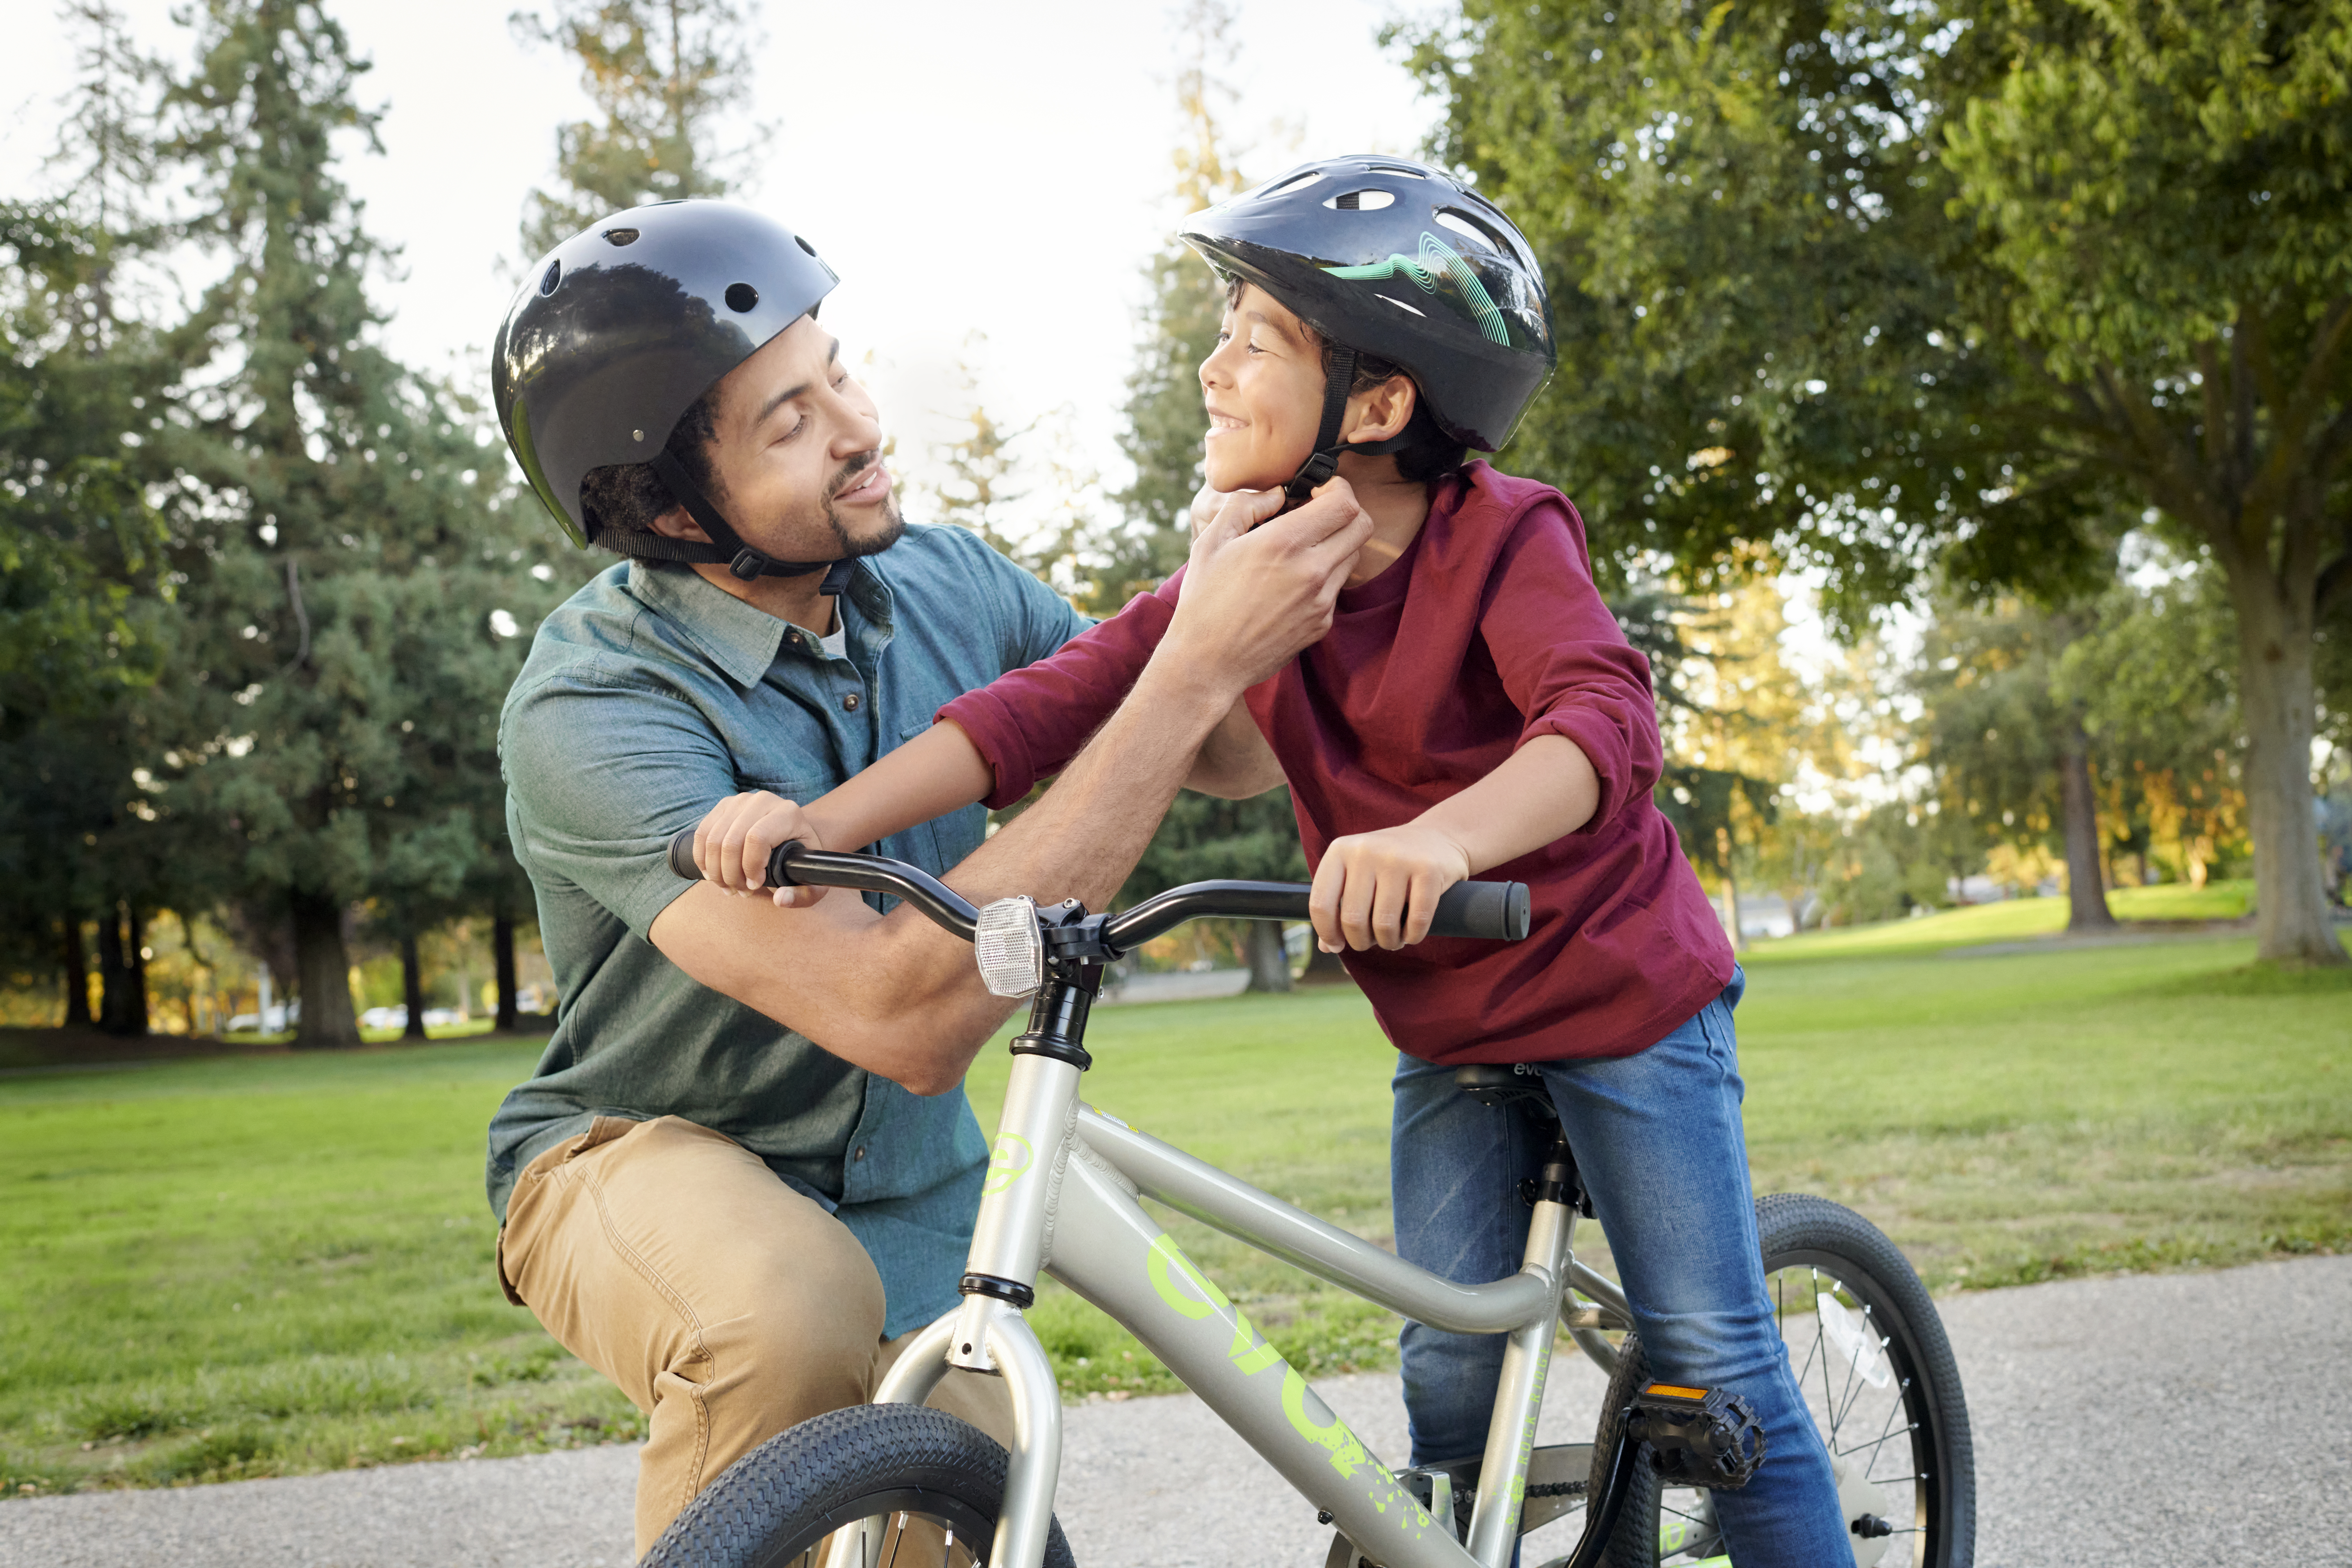 Bike safety tips from experts at Stanford Medicine Childrens Health